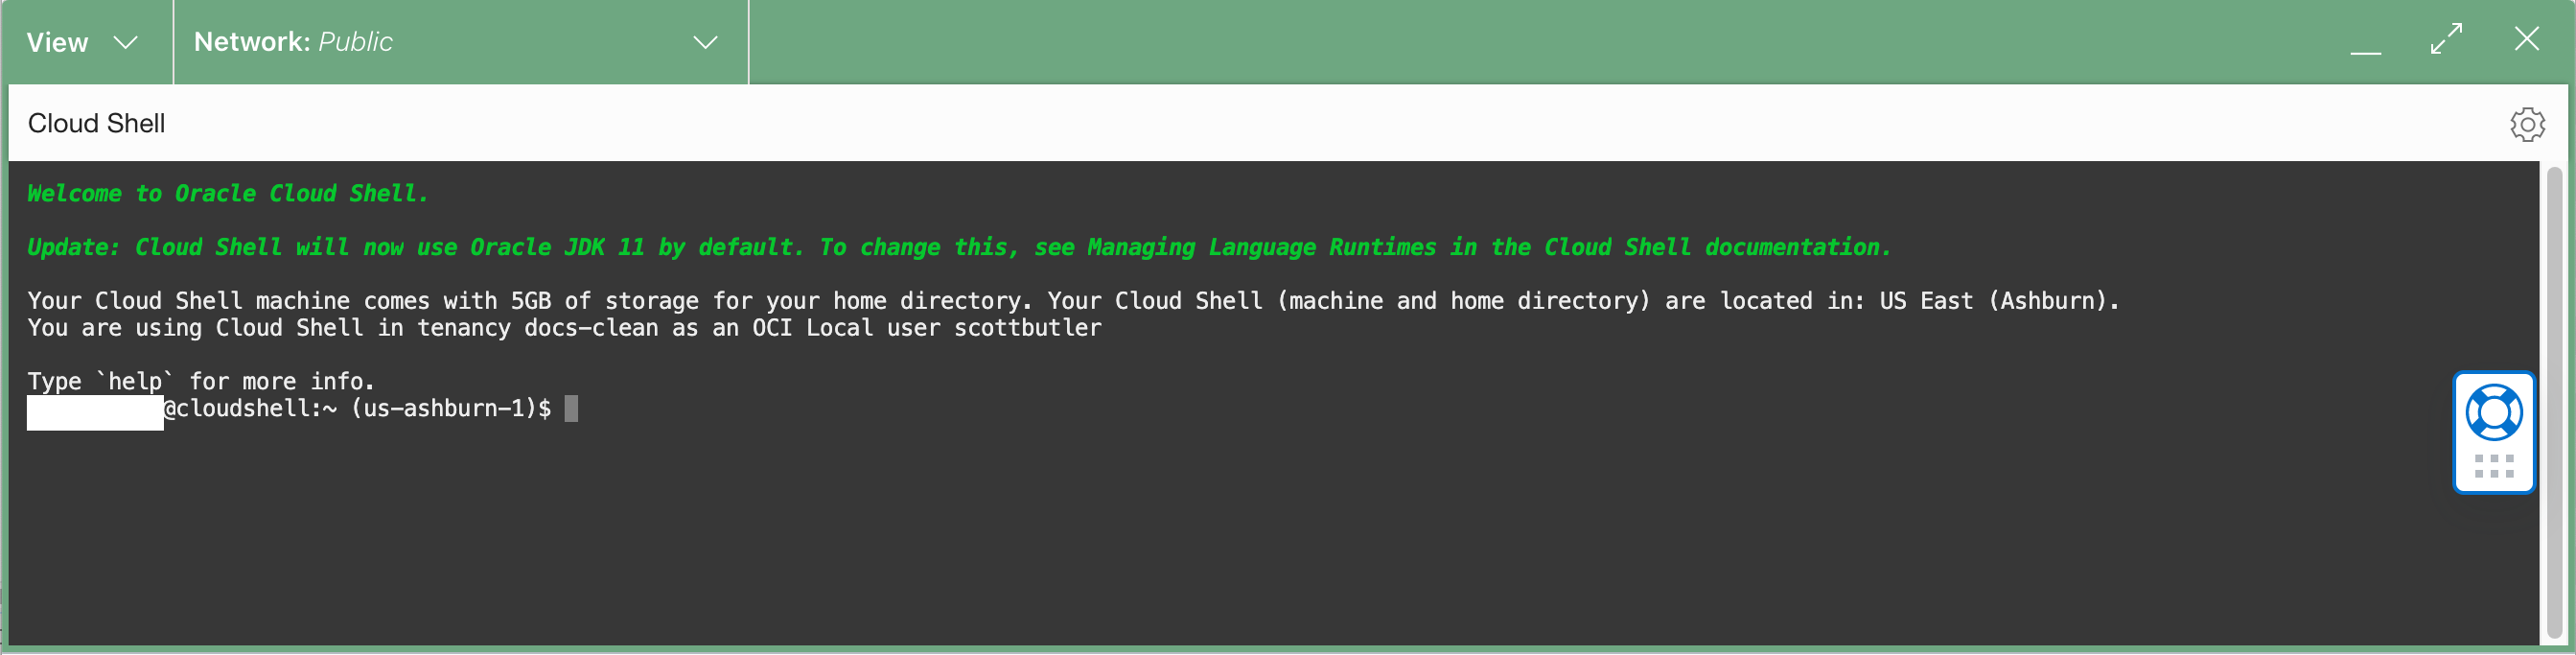 Cloud shell drawer example